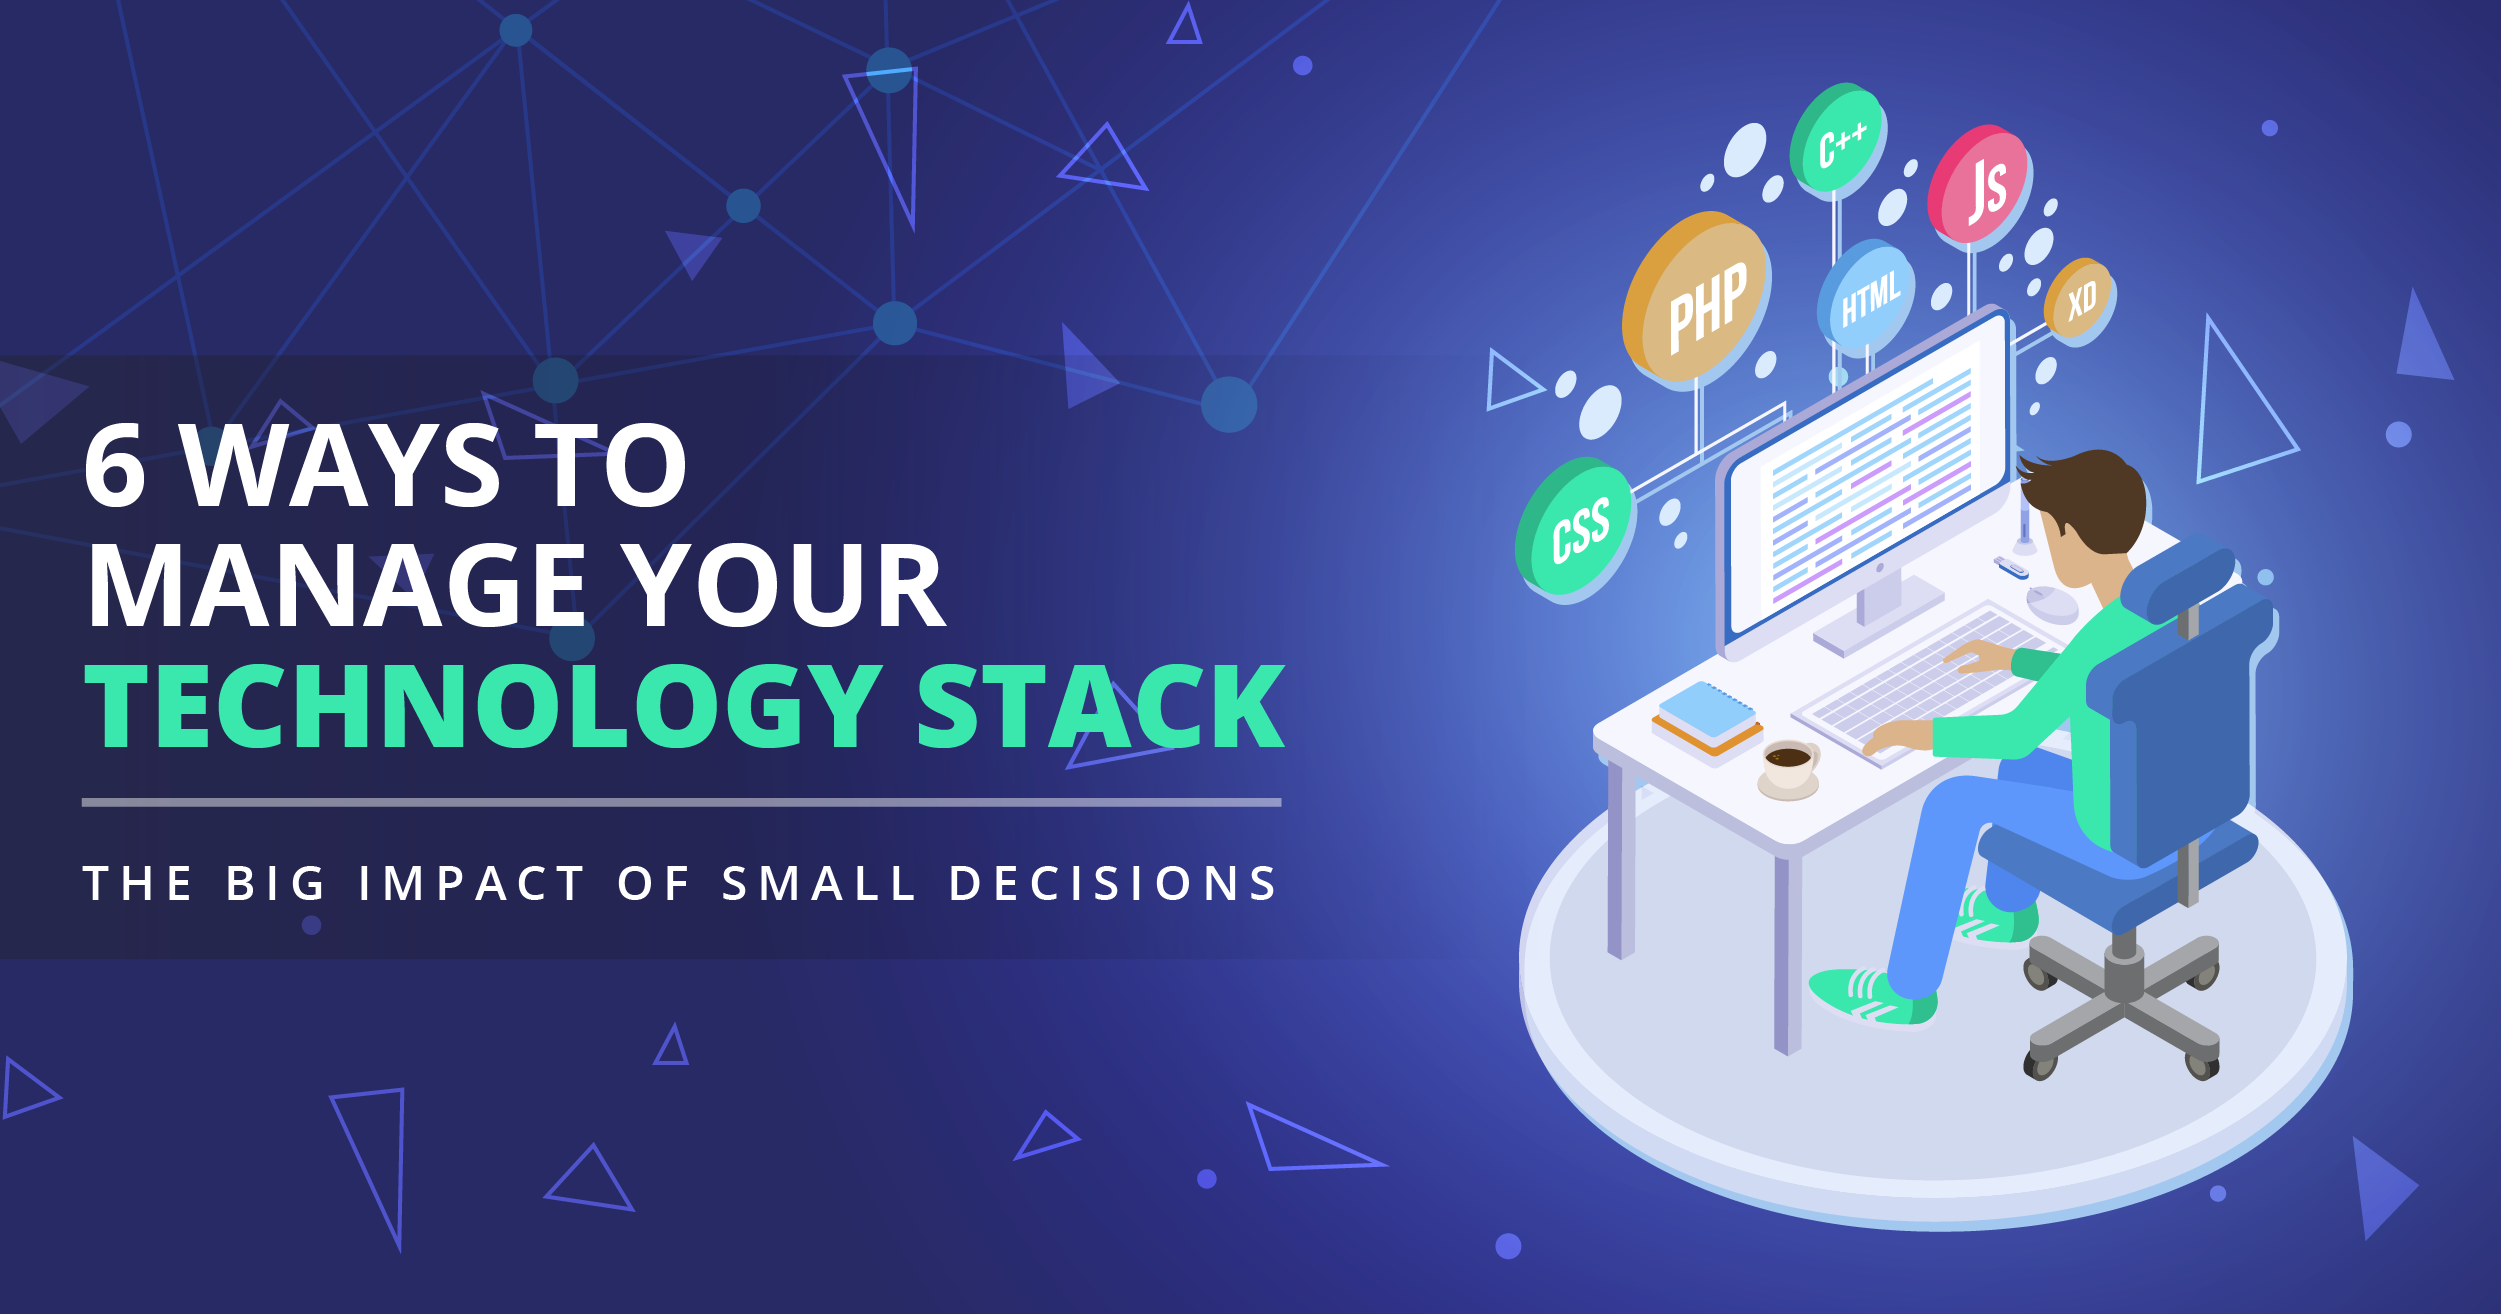 6 Ways to Manage Your Technology Stack: The Big Impact of Small Decisions